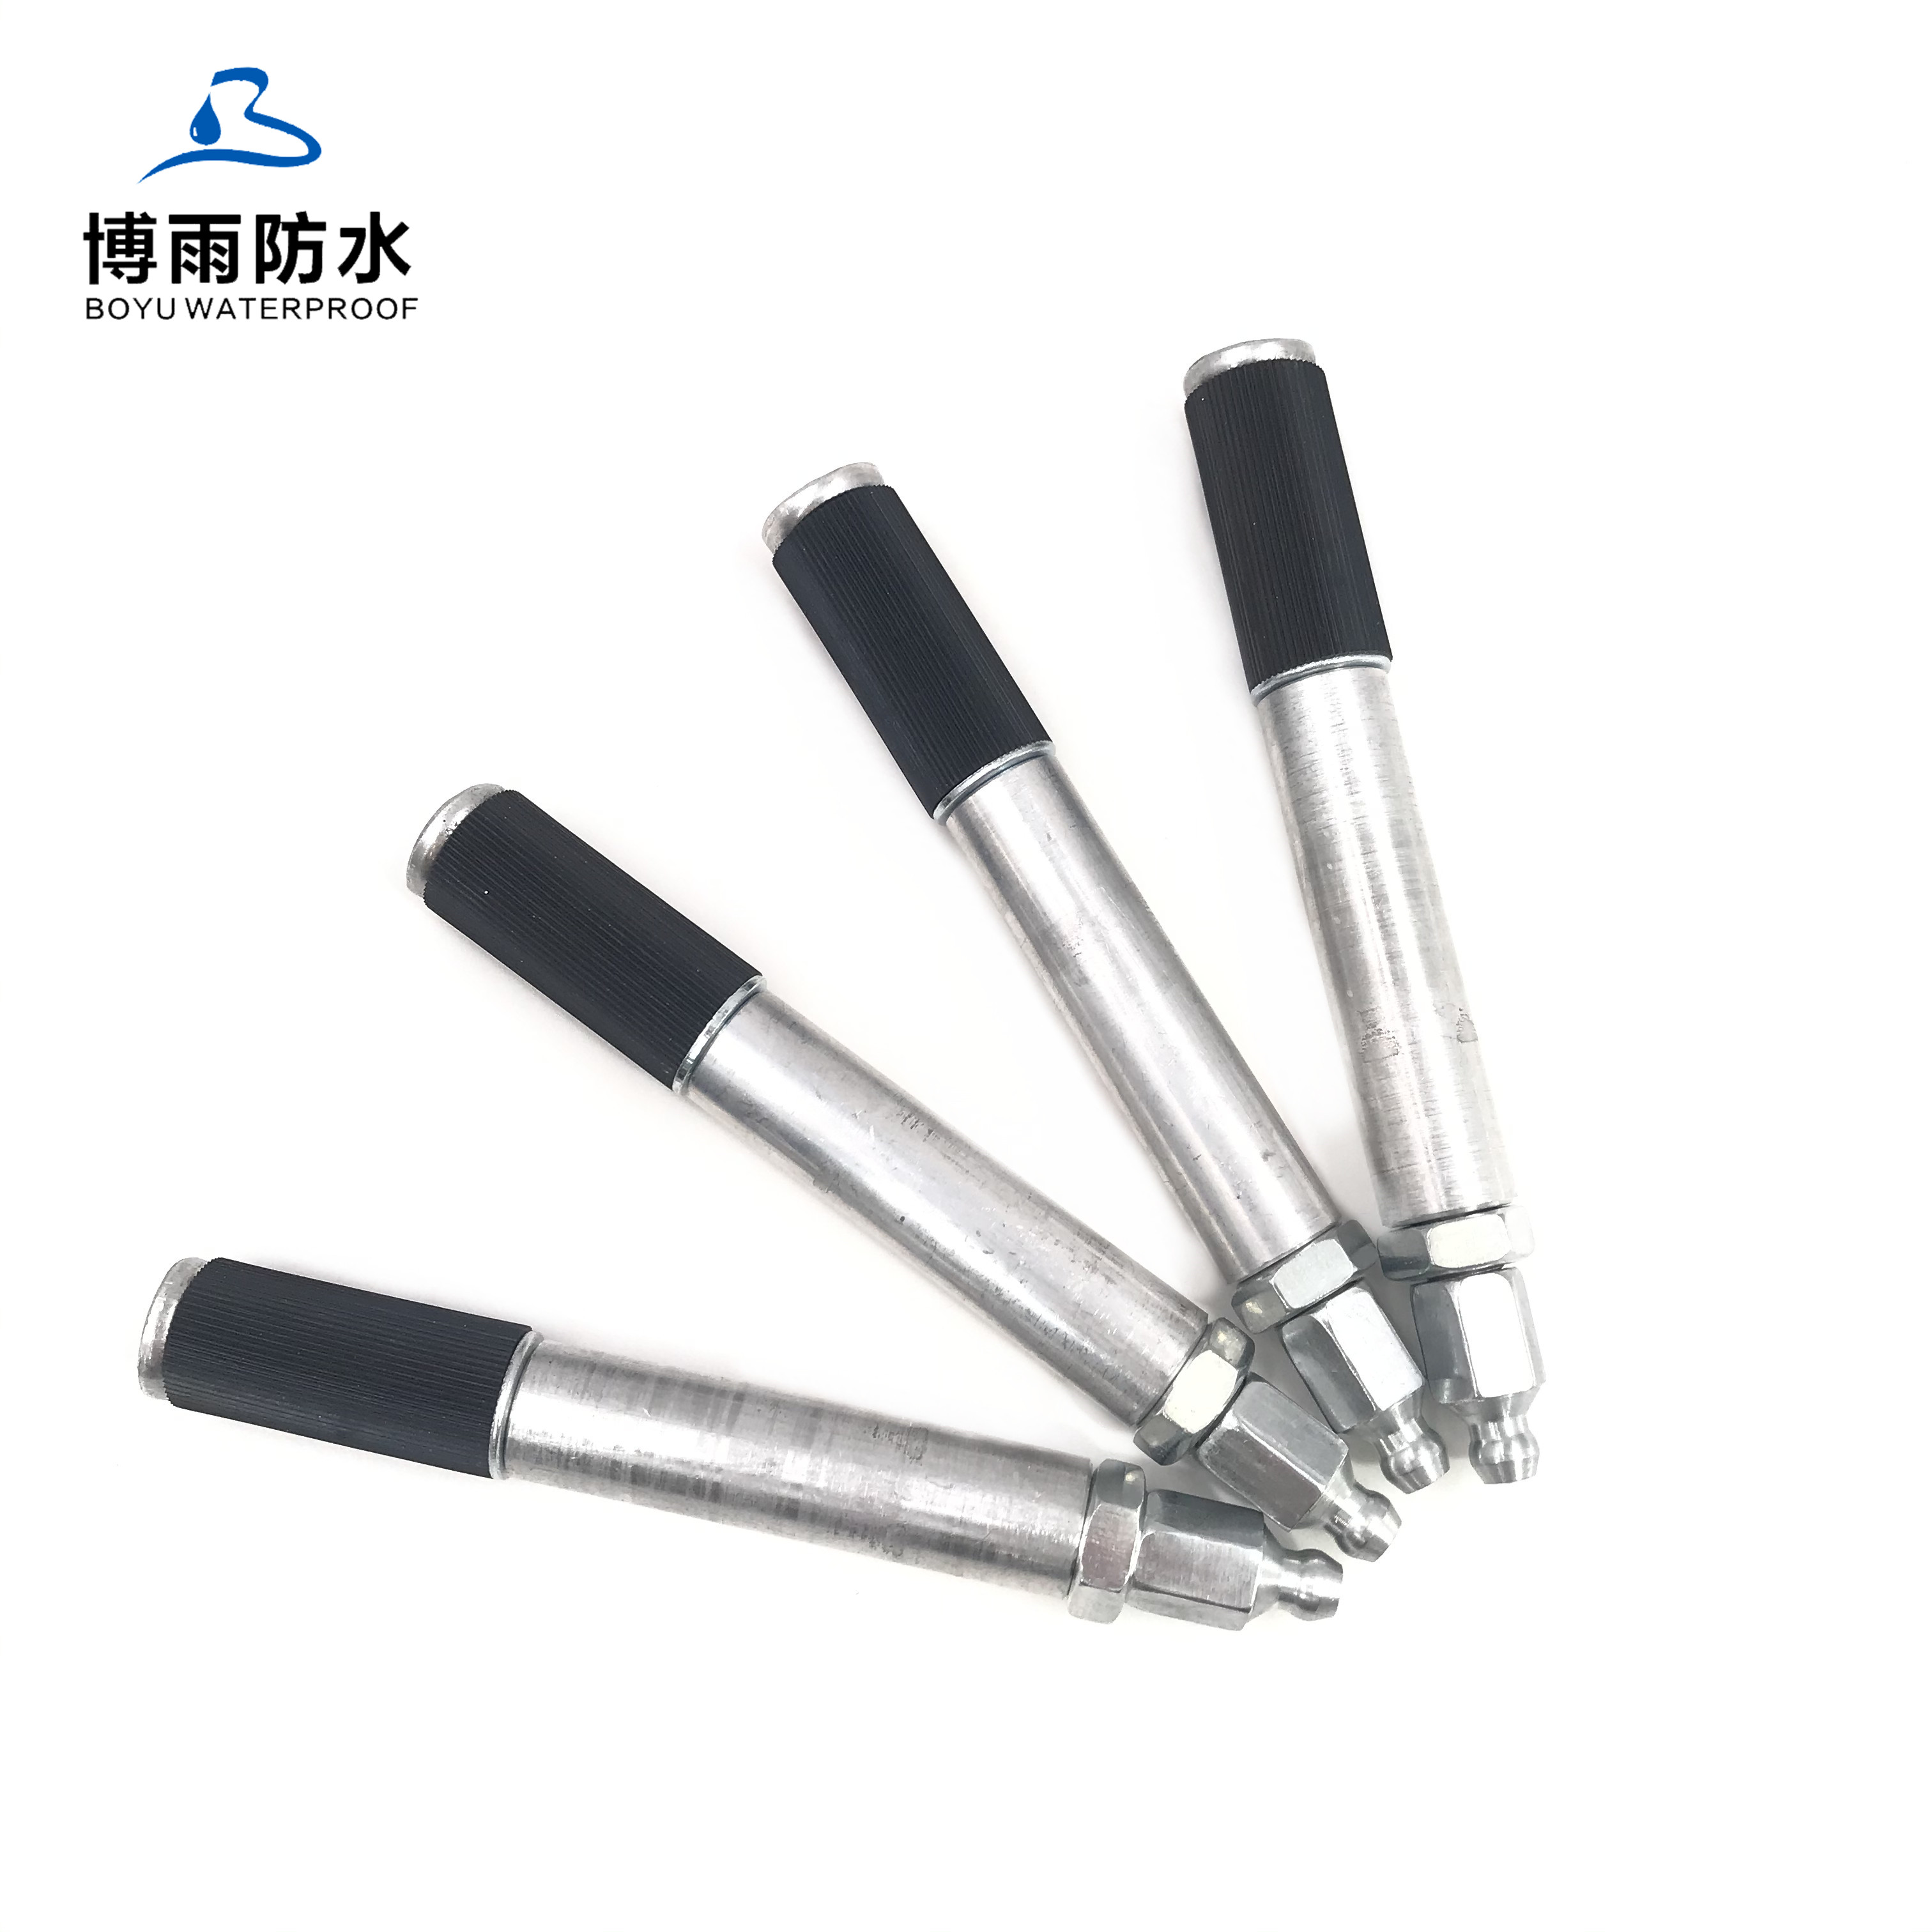 injection grouting packers steel Aluminum 13*100mm A10 Grout Injection Packer